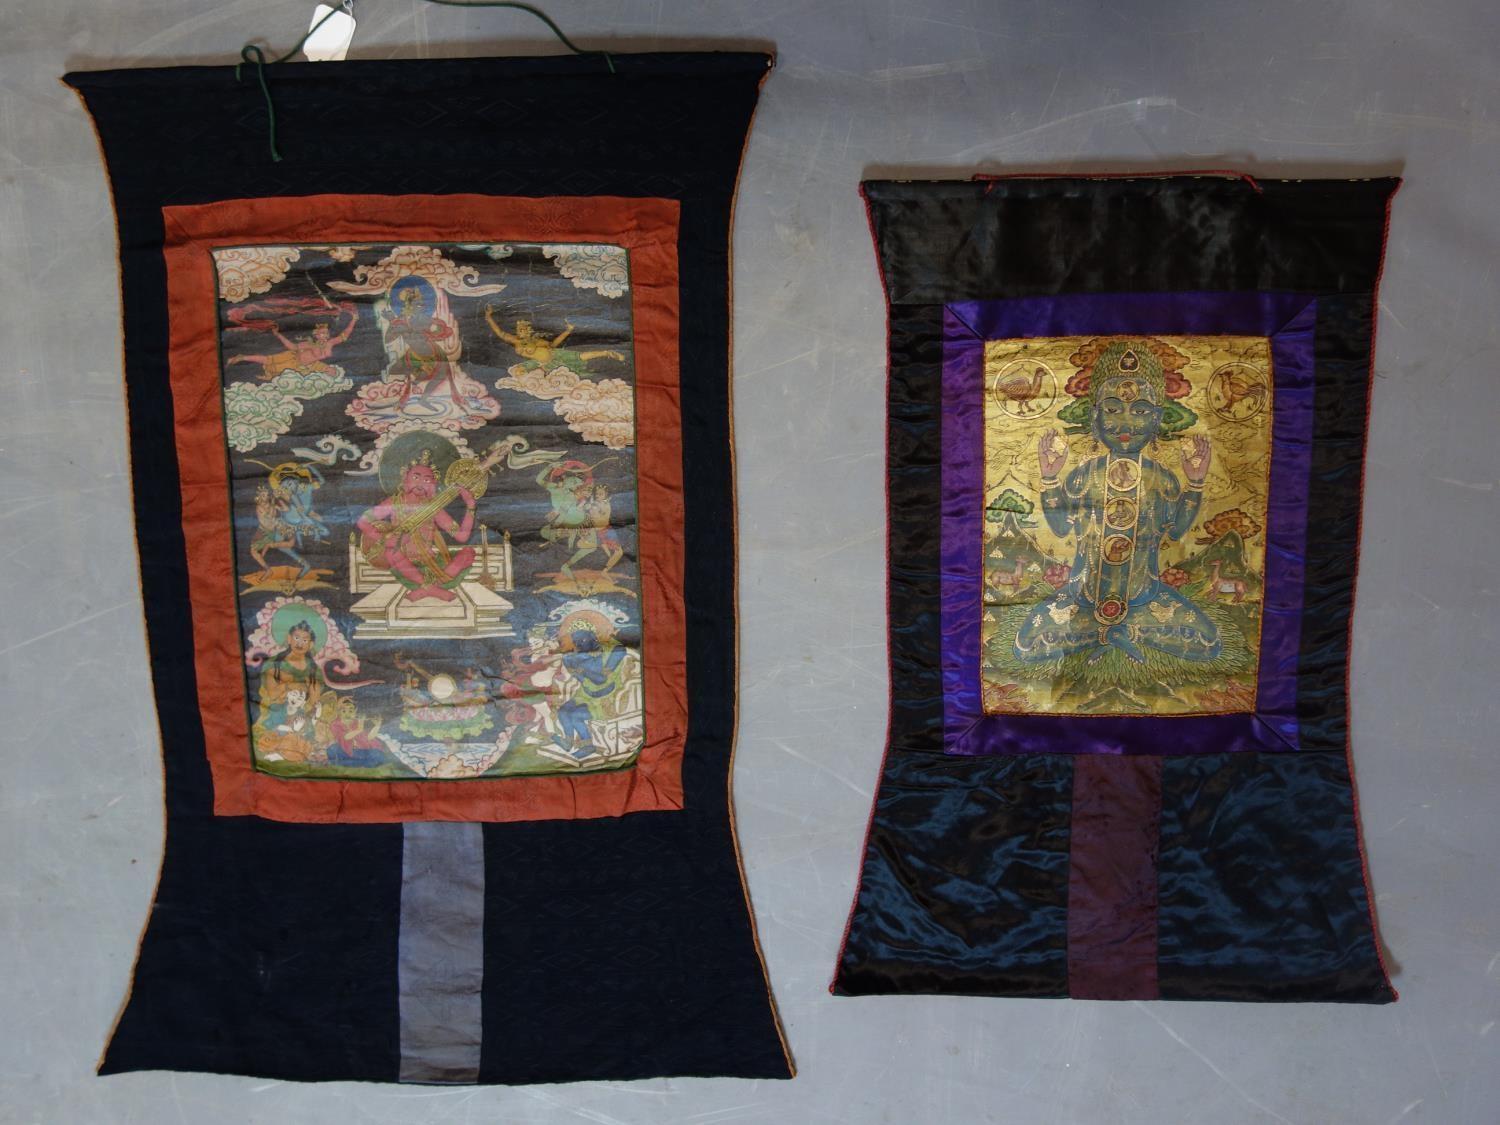 A hand-painted Tibetan Thangka depicting a deity in a landscape scene with animals, having script to